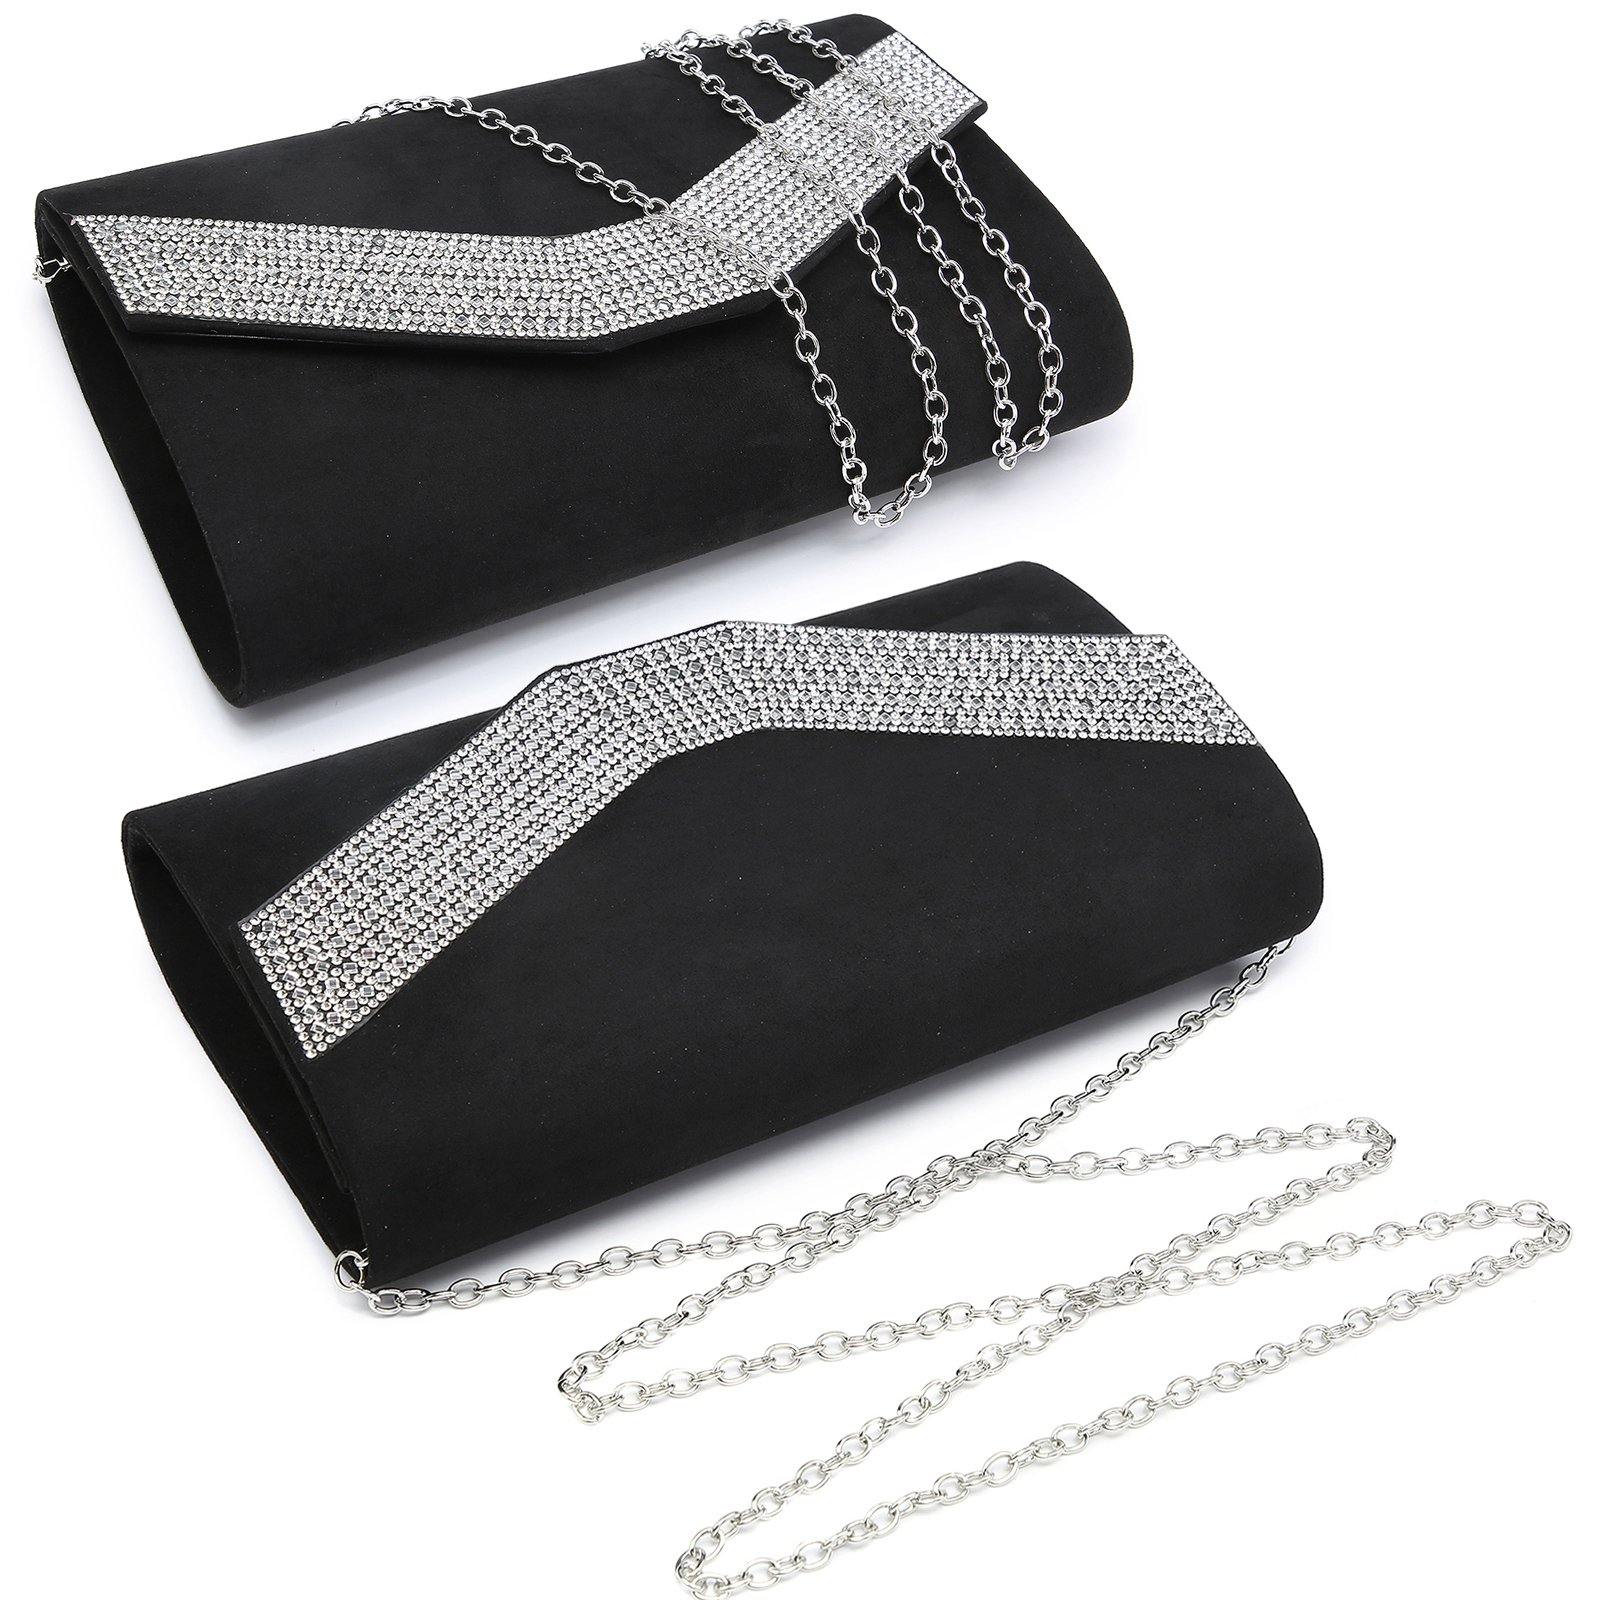 Ele ELEOPTION Women Black Beaded Clutch Purse Women's Evening Clutch Triangle Lady Girl Evening Bag for Cocktail Wedding Party for 6.0inch Android